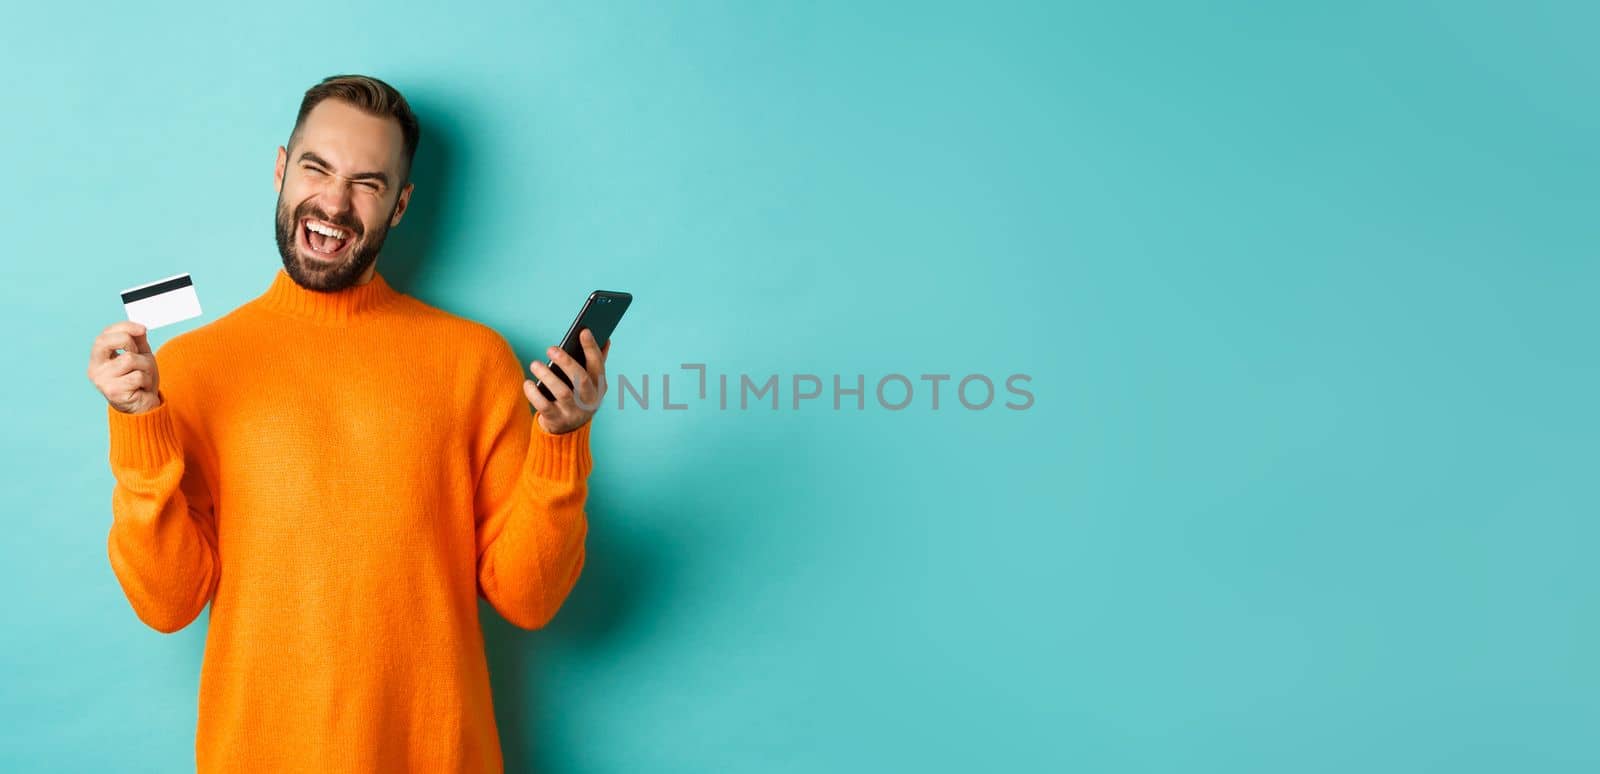 Online shopping. Happy young man using mobile phone and credit card, paying internet, light blue background.